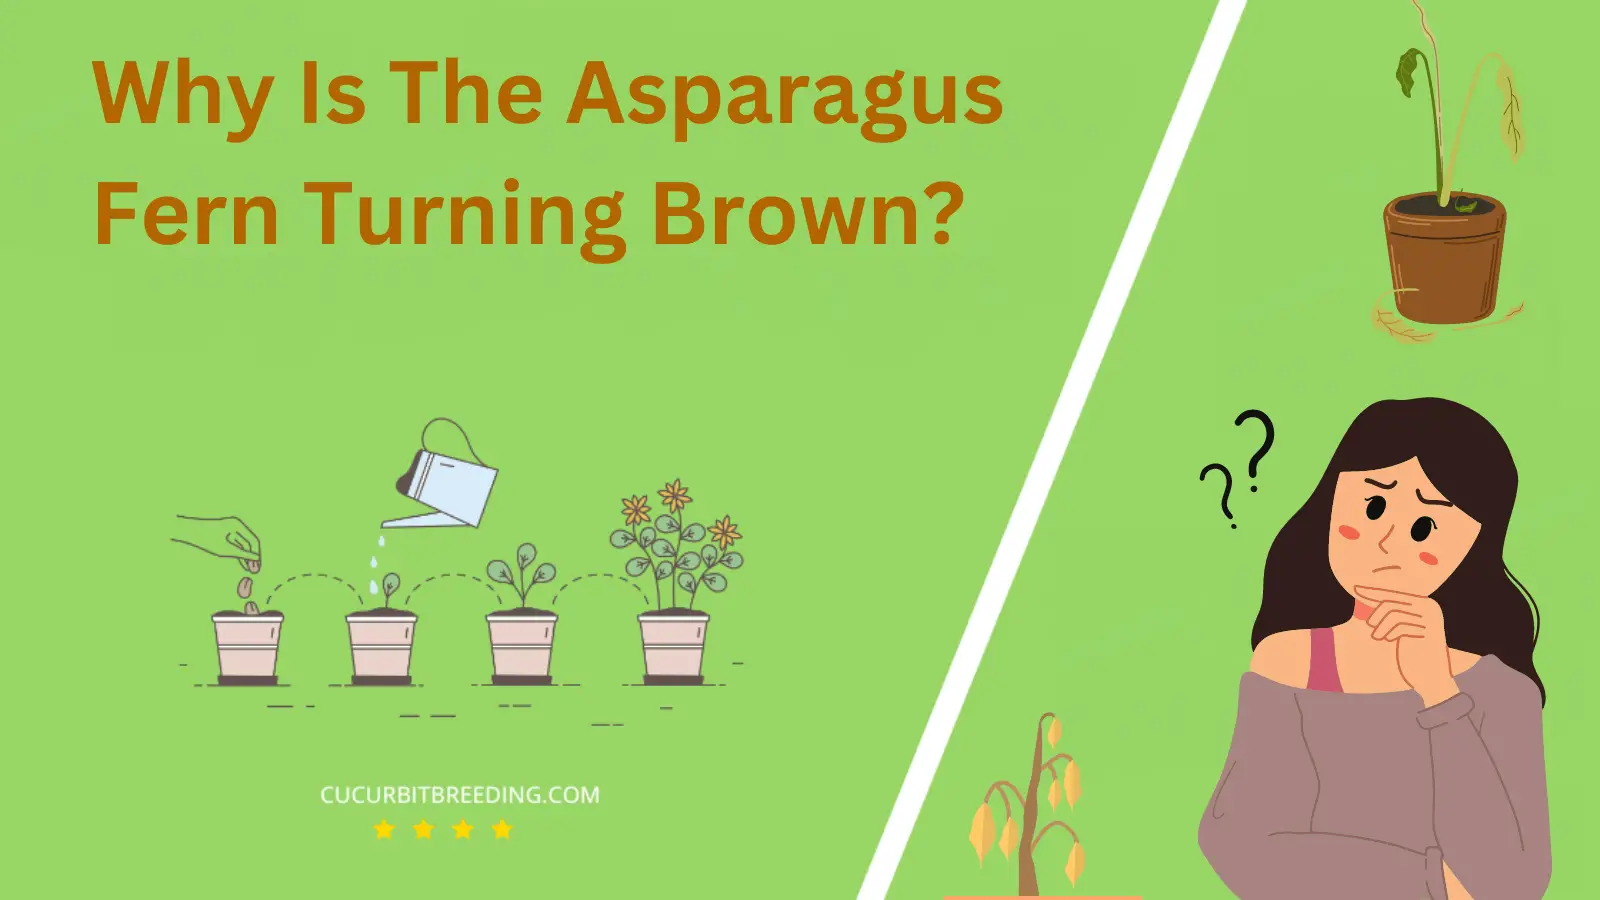 Why Is The Asparagus Fern Turning Brown